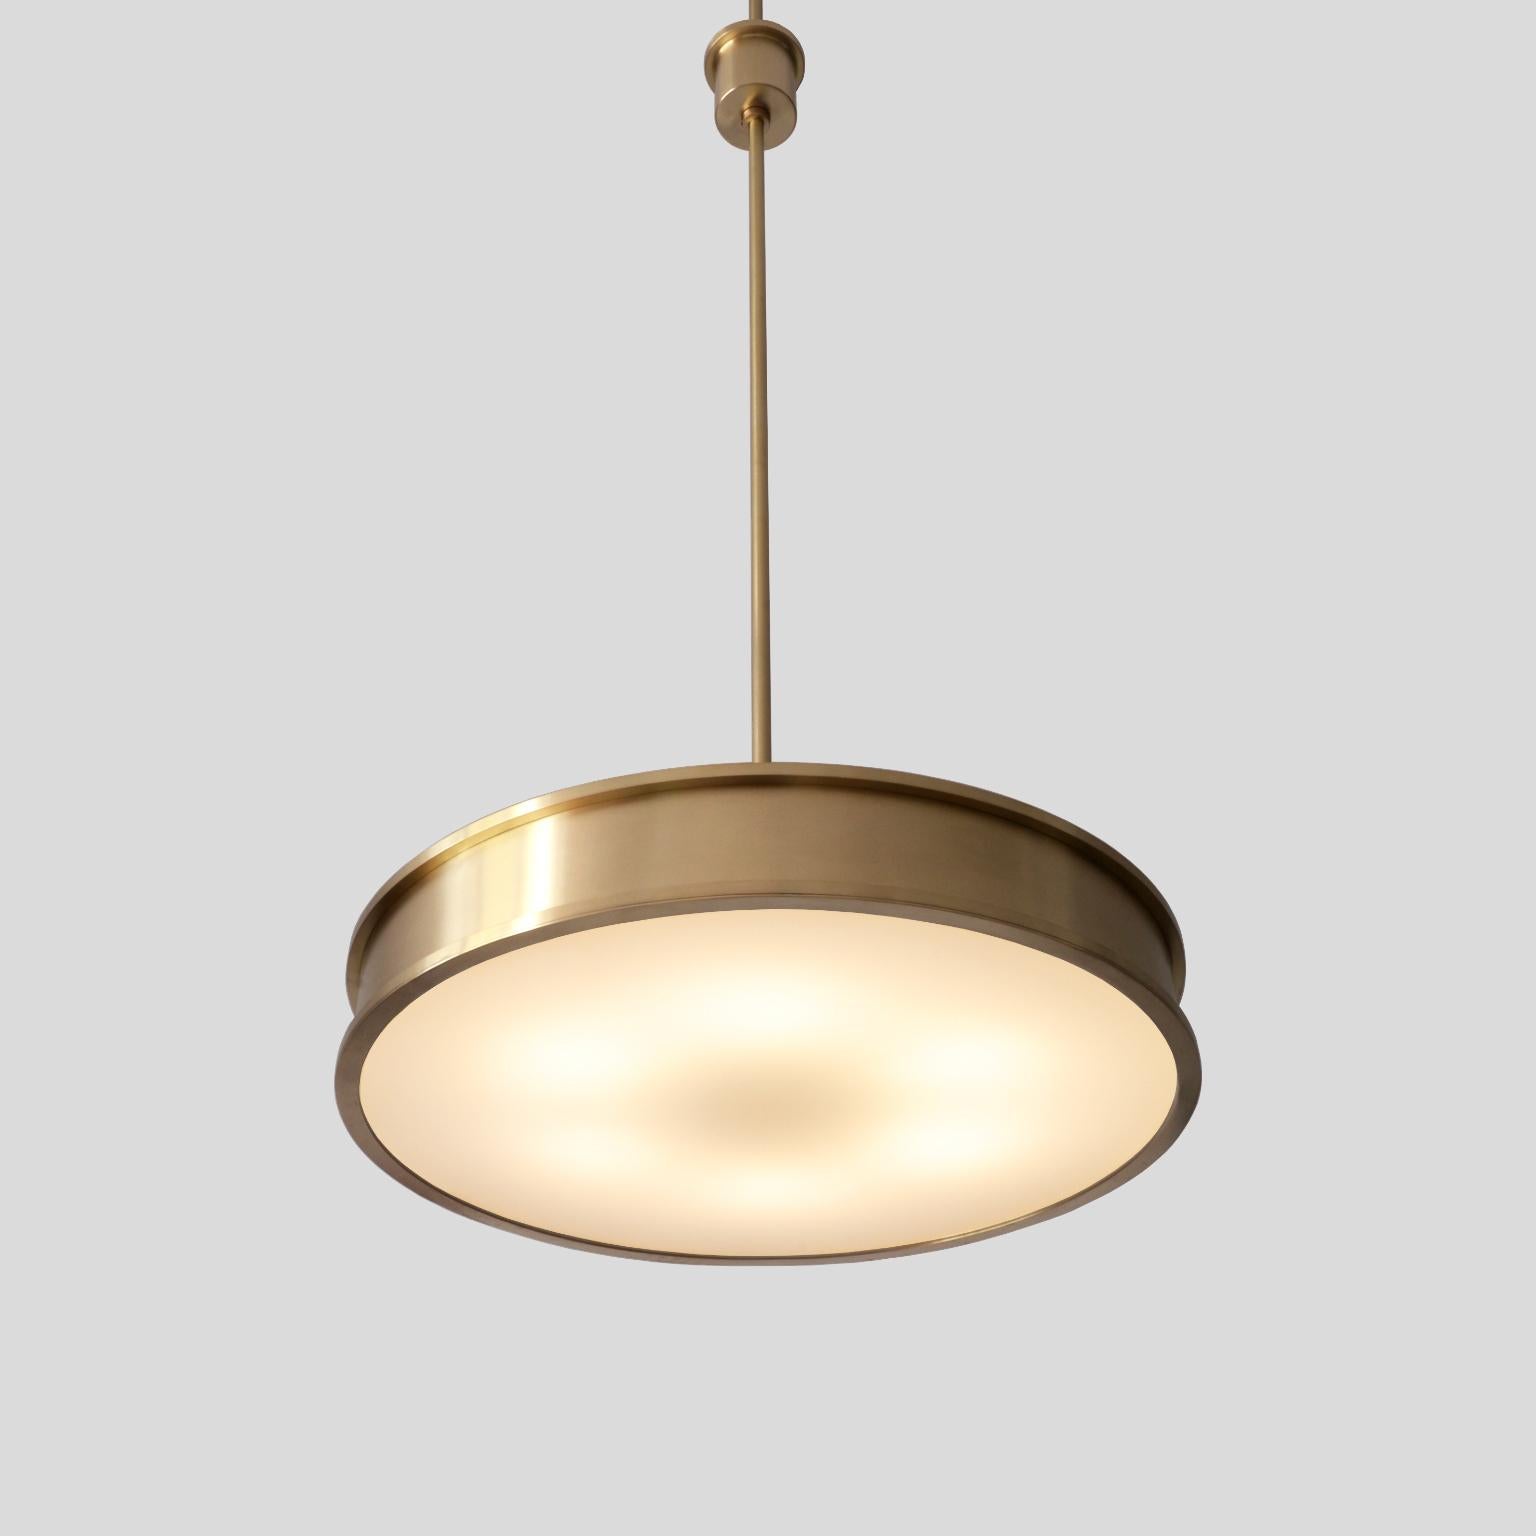 Contemporary Bespoke Modernist Circular Pendant Light in Brushed Brass and Opal Glass, 2018 For Sale